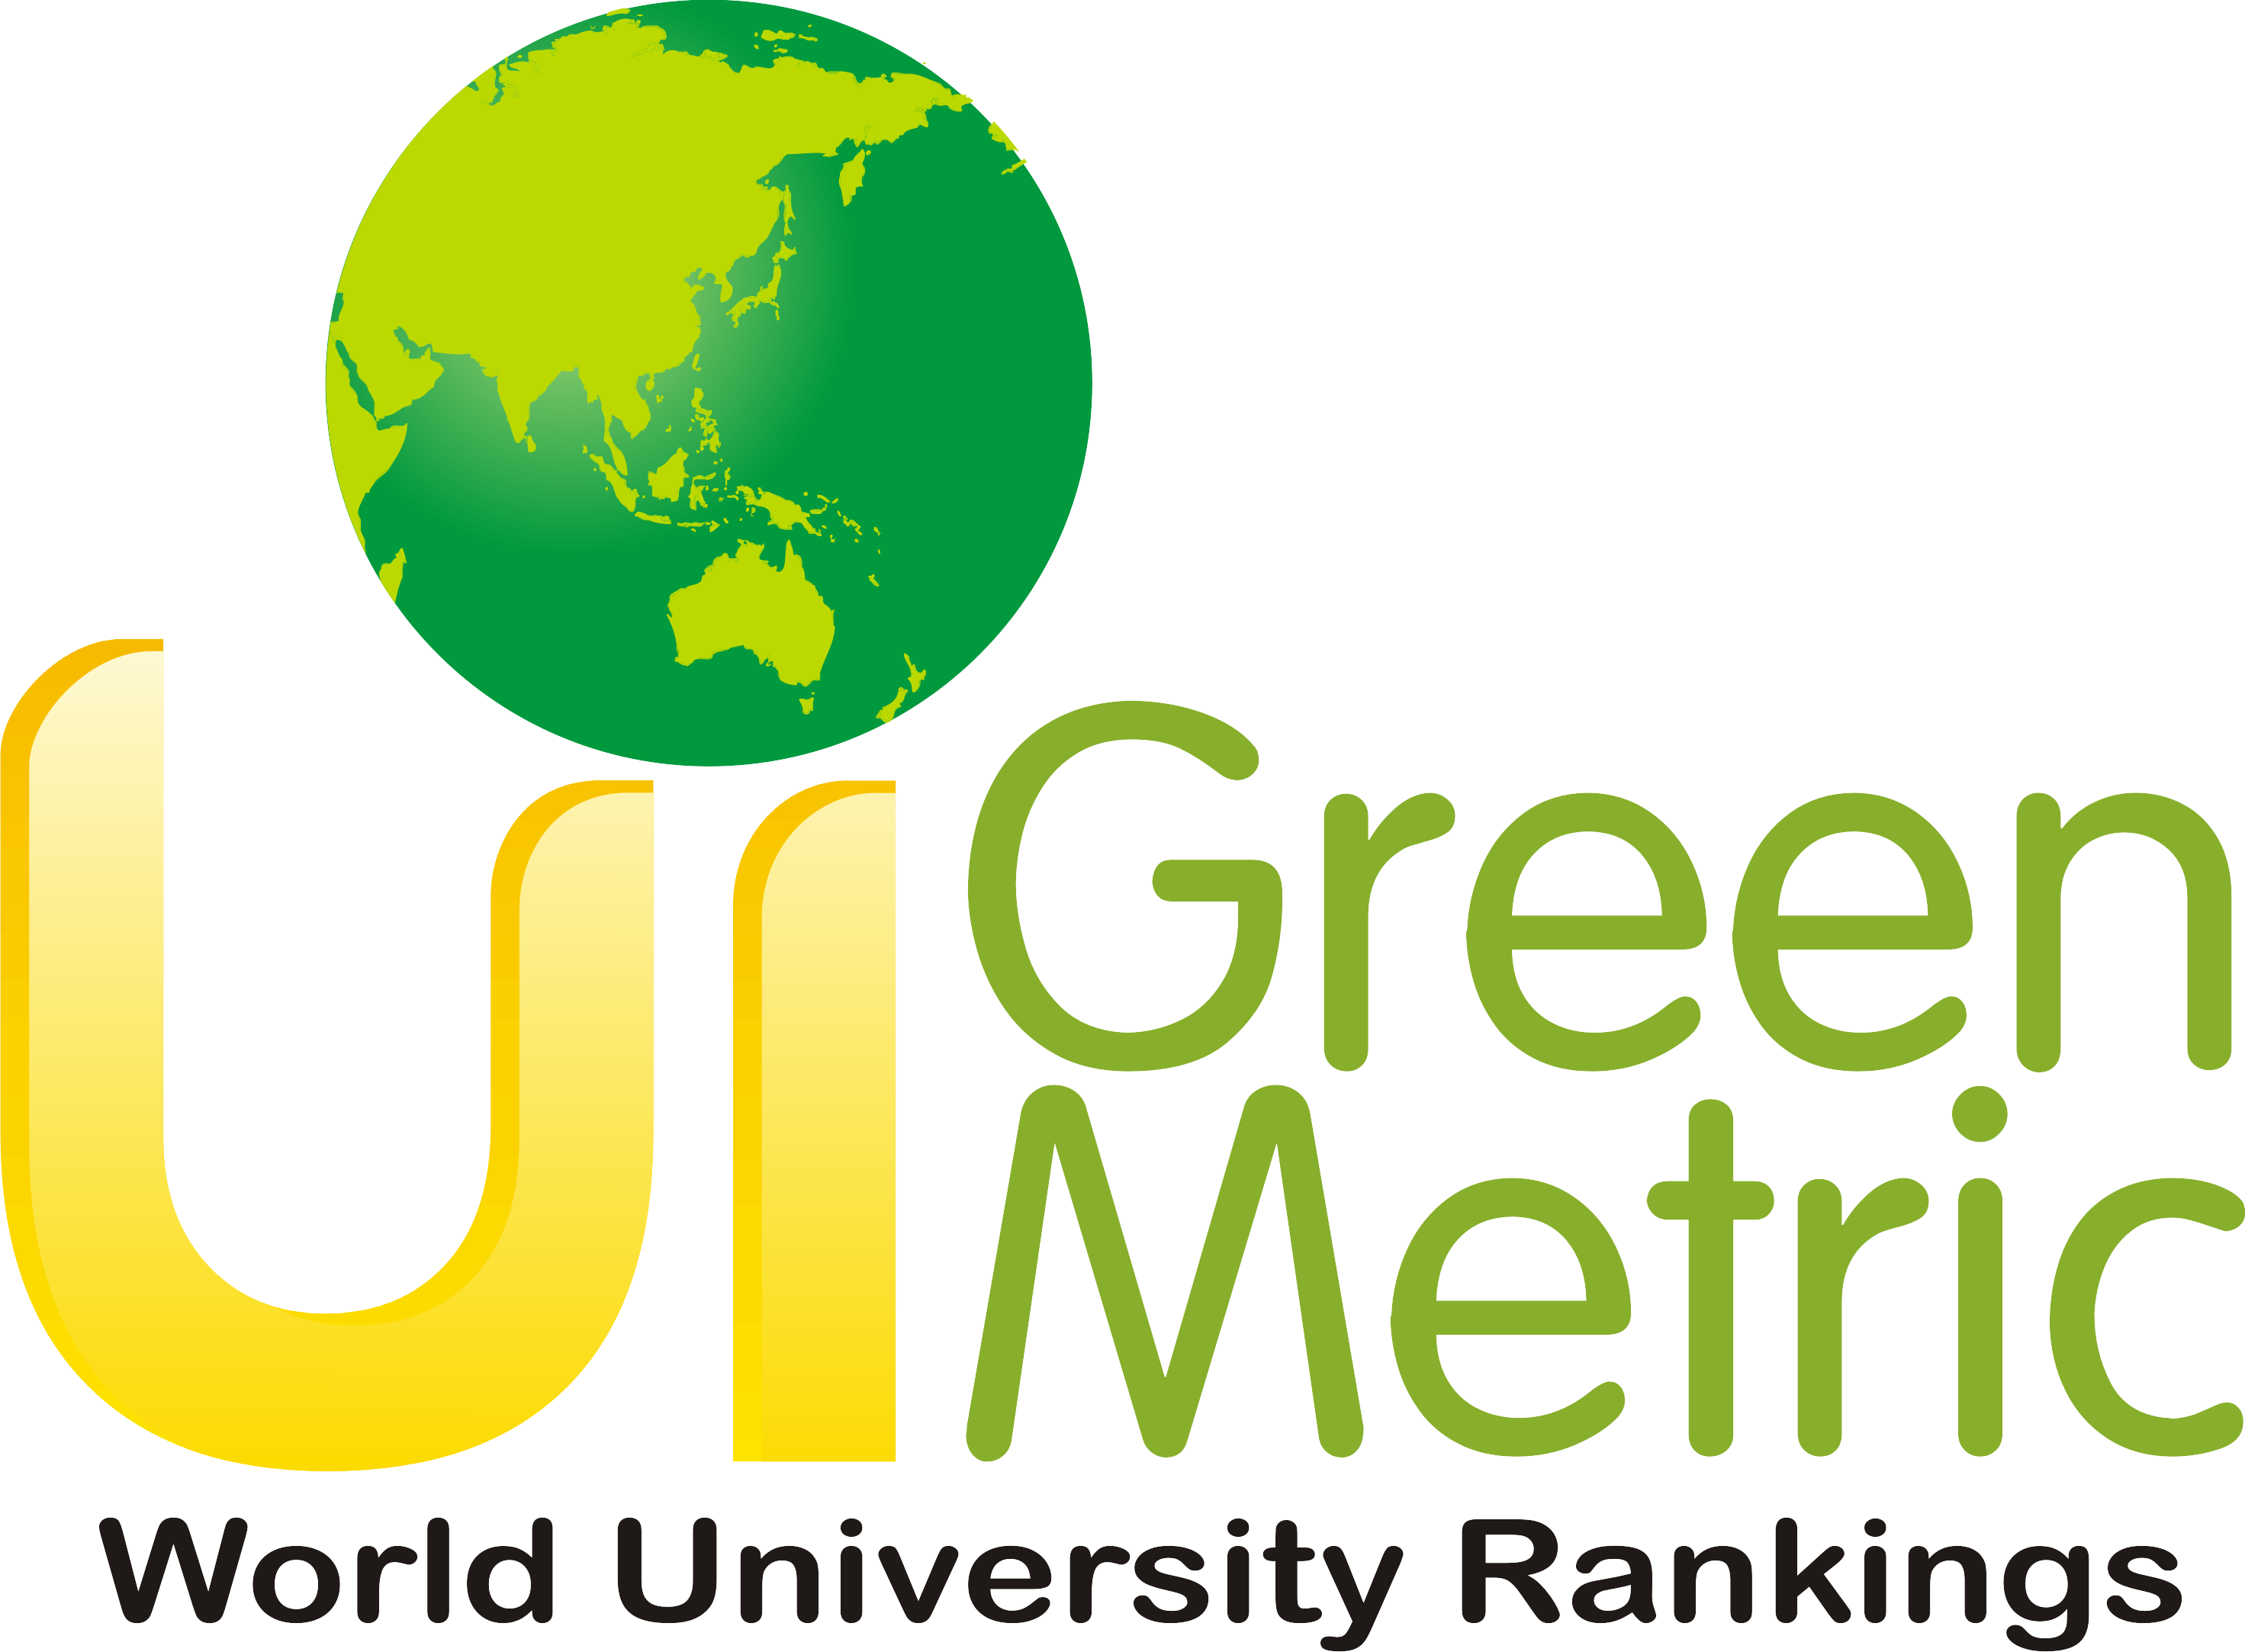 UMS submission for 2022' UI GreenMetric World University Ranking